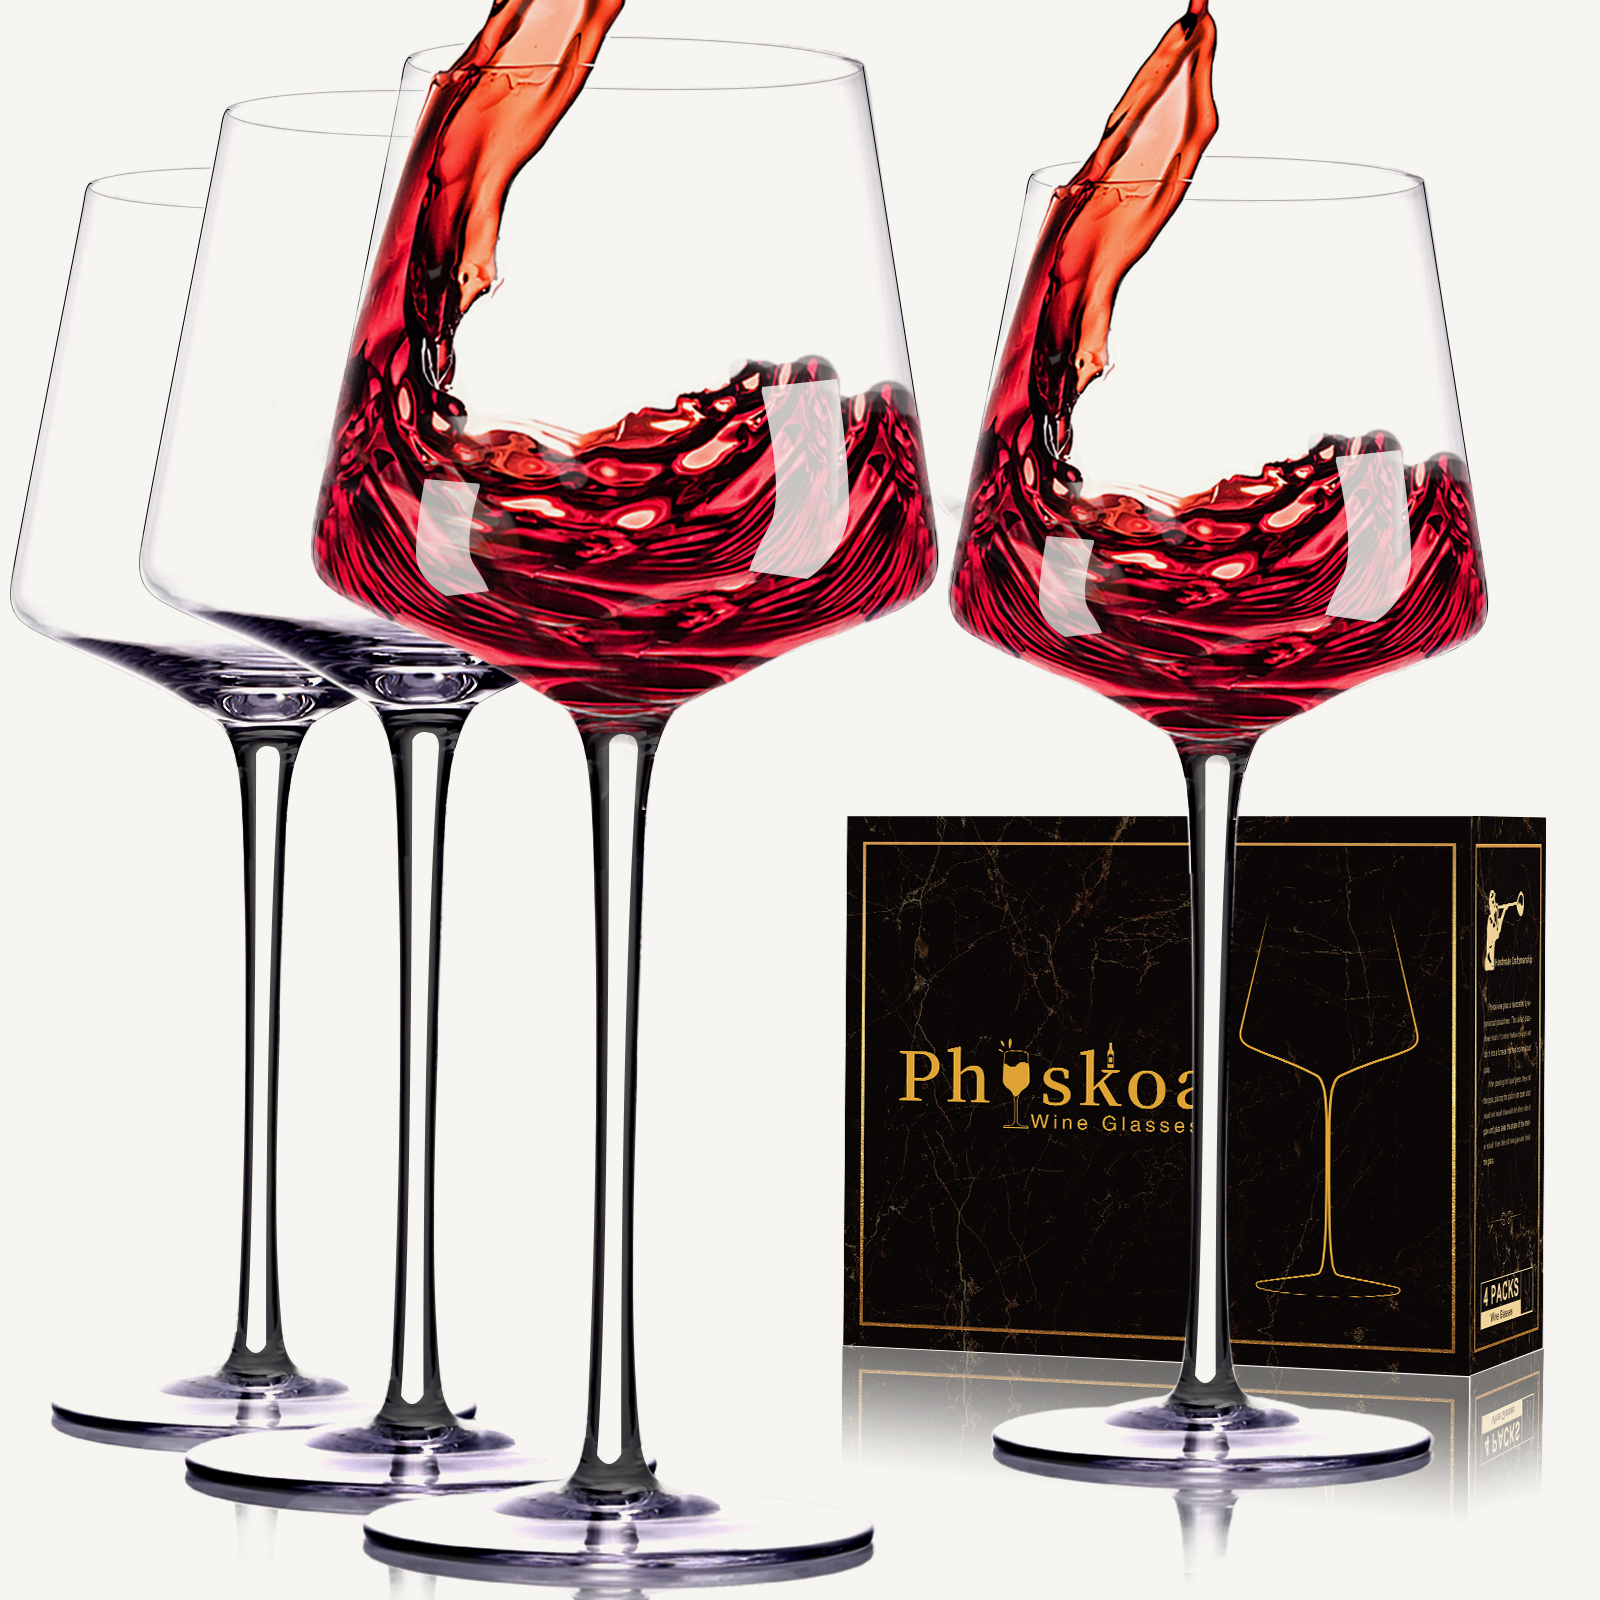 Physkoa Wine Glasses Set 4-21Ounce Red Wine Glasses with Tall Long  Stem,Flat Bottom,Large Wine Glasses Gift for Home Party